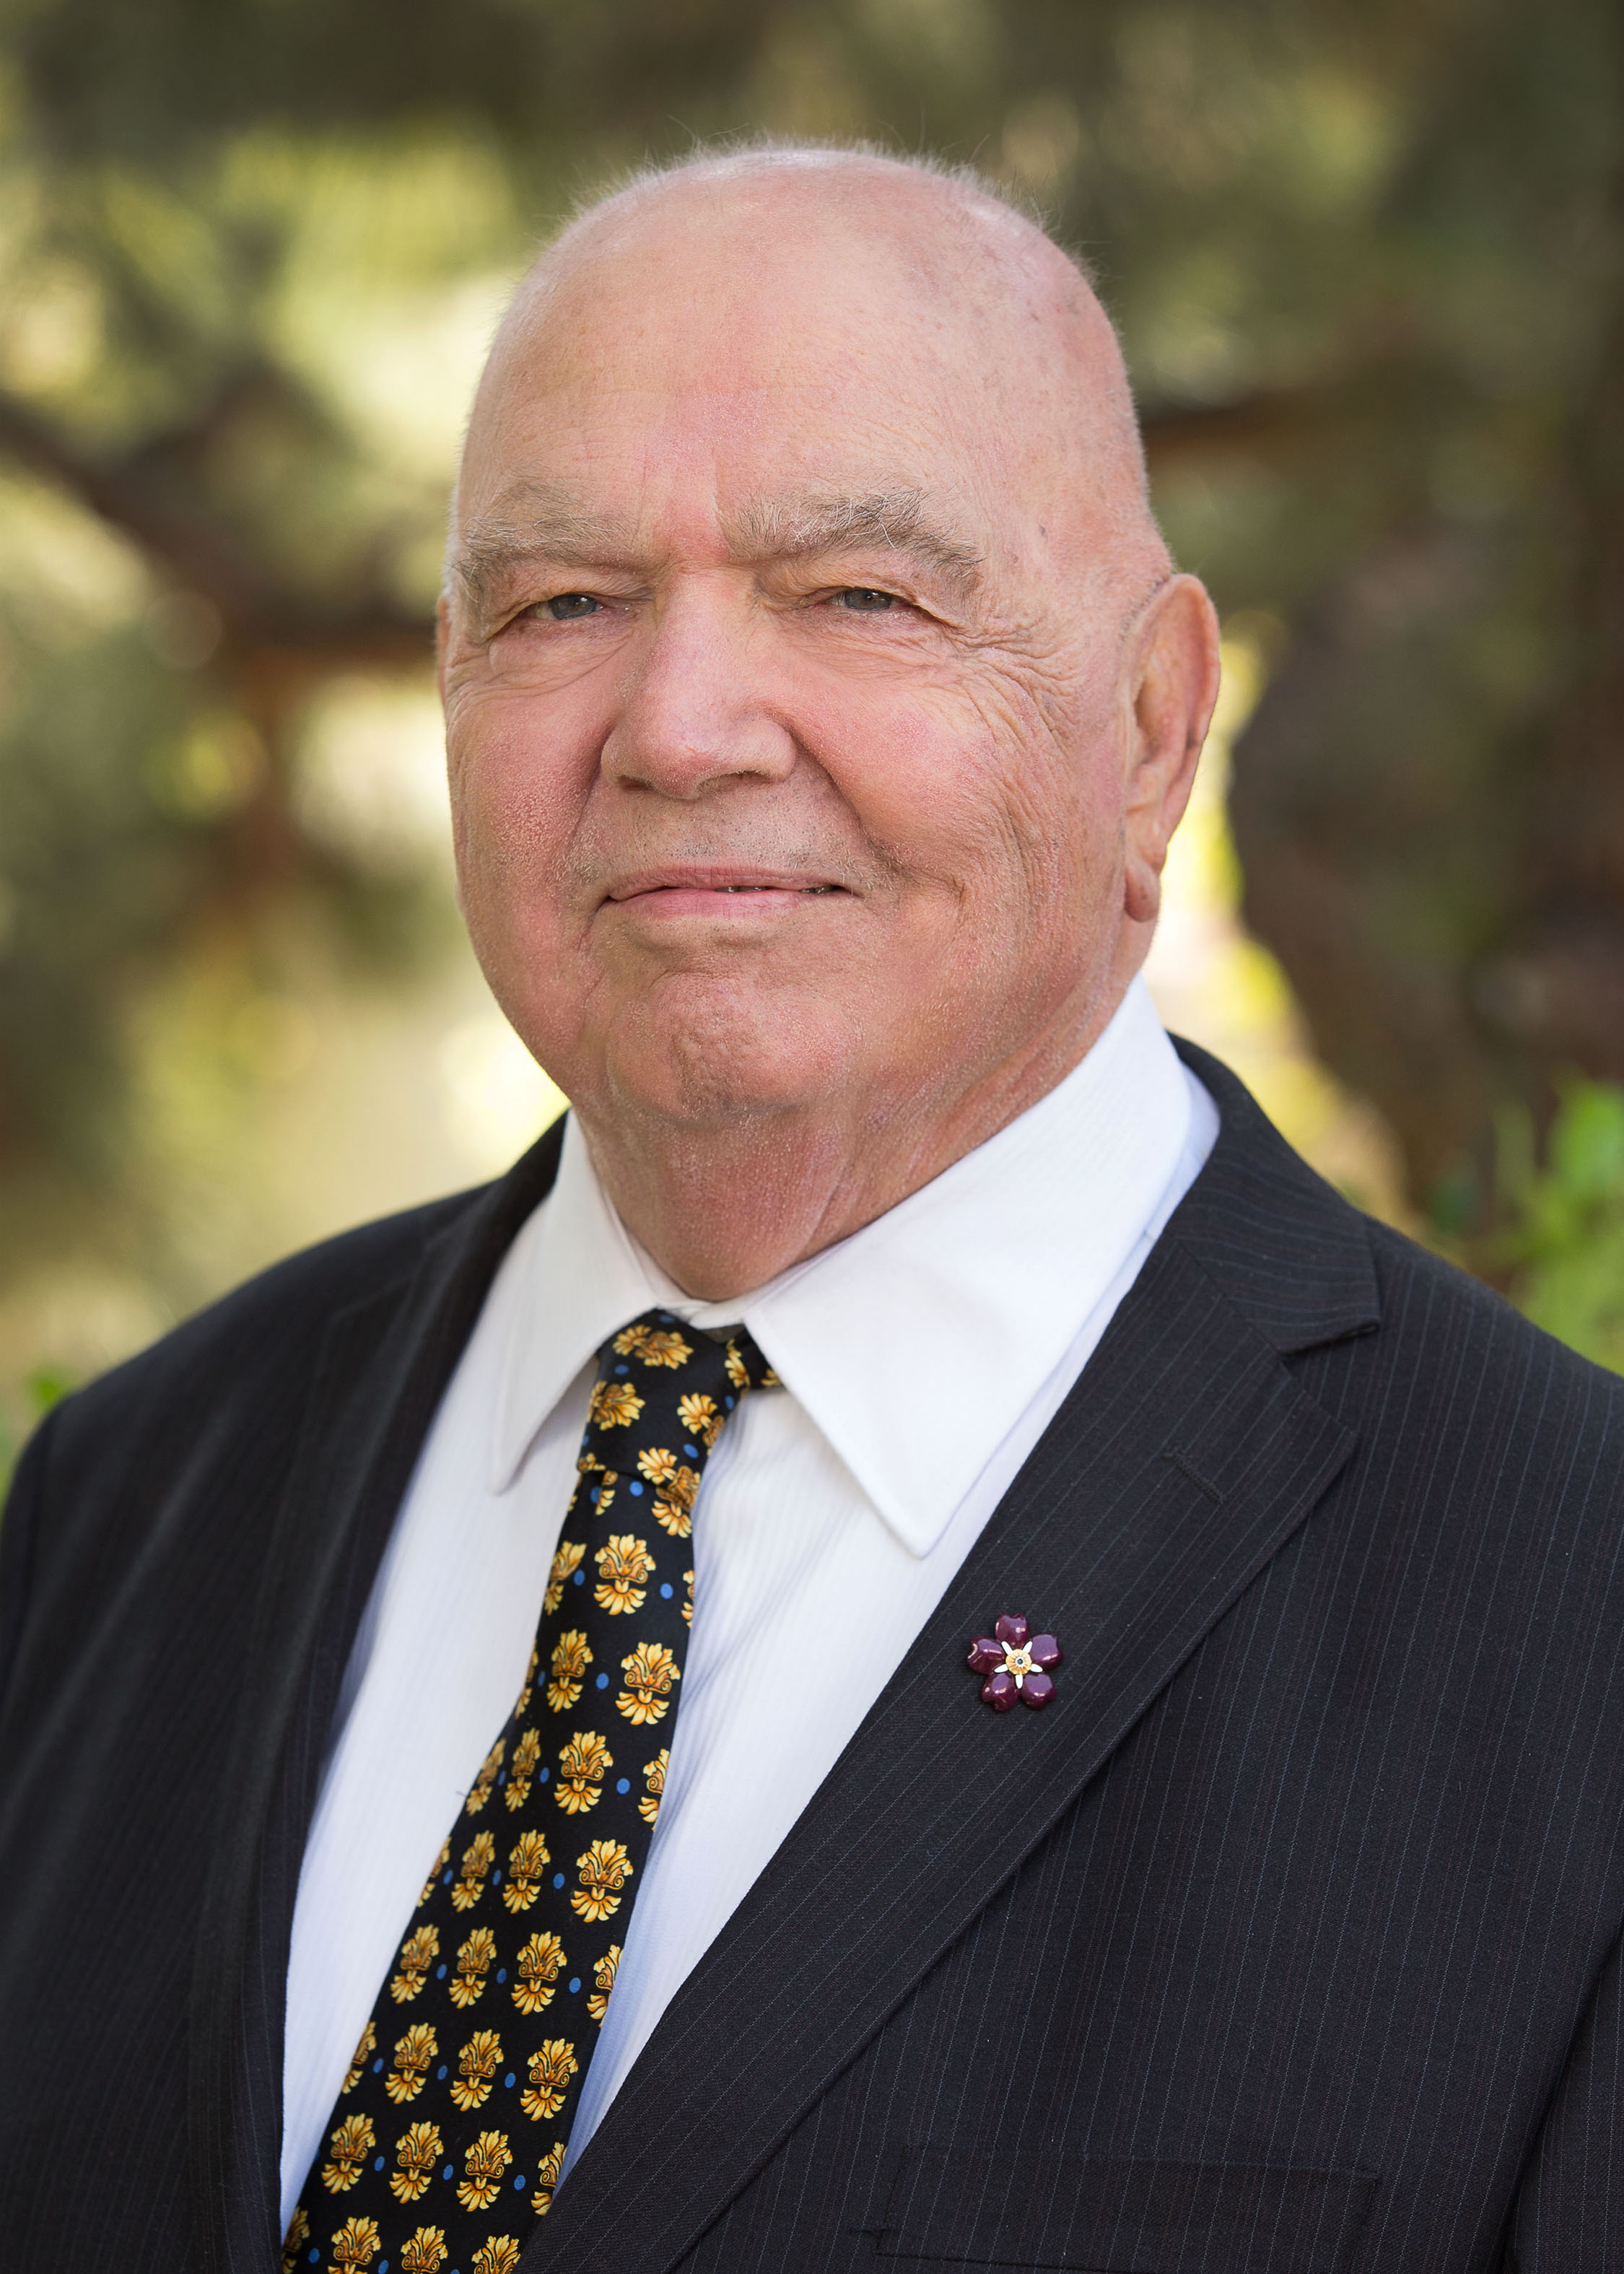 Richard G. Hovannisian is Professor Emeritus and Past Holder of the Armenian Educational Foundation Chair in Modern Armenian History at UCLA, Adjunct Professor at USC and Presidential Fellow in Holocaust History at Chapman University.